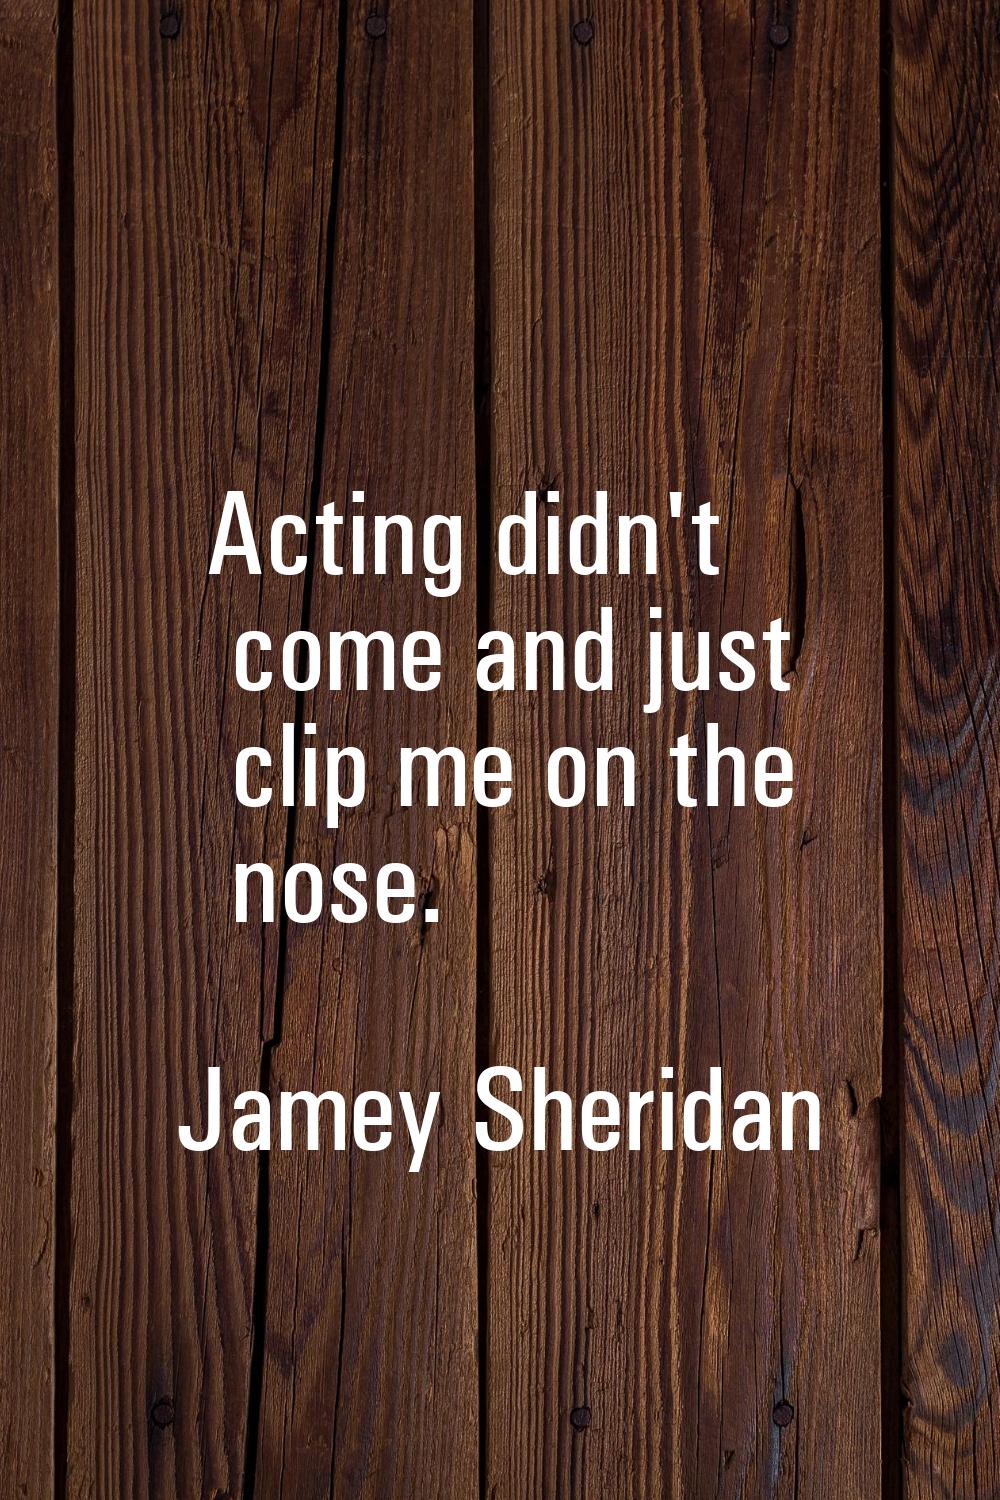 Acting didn't come and just clip me on the nose.